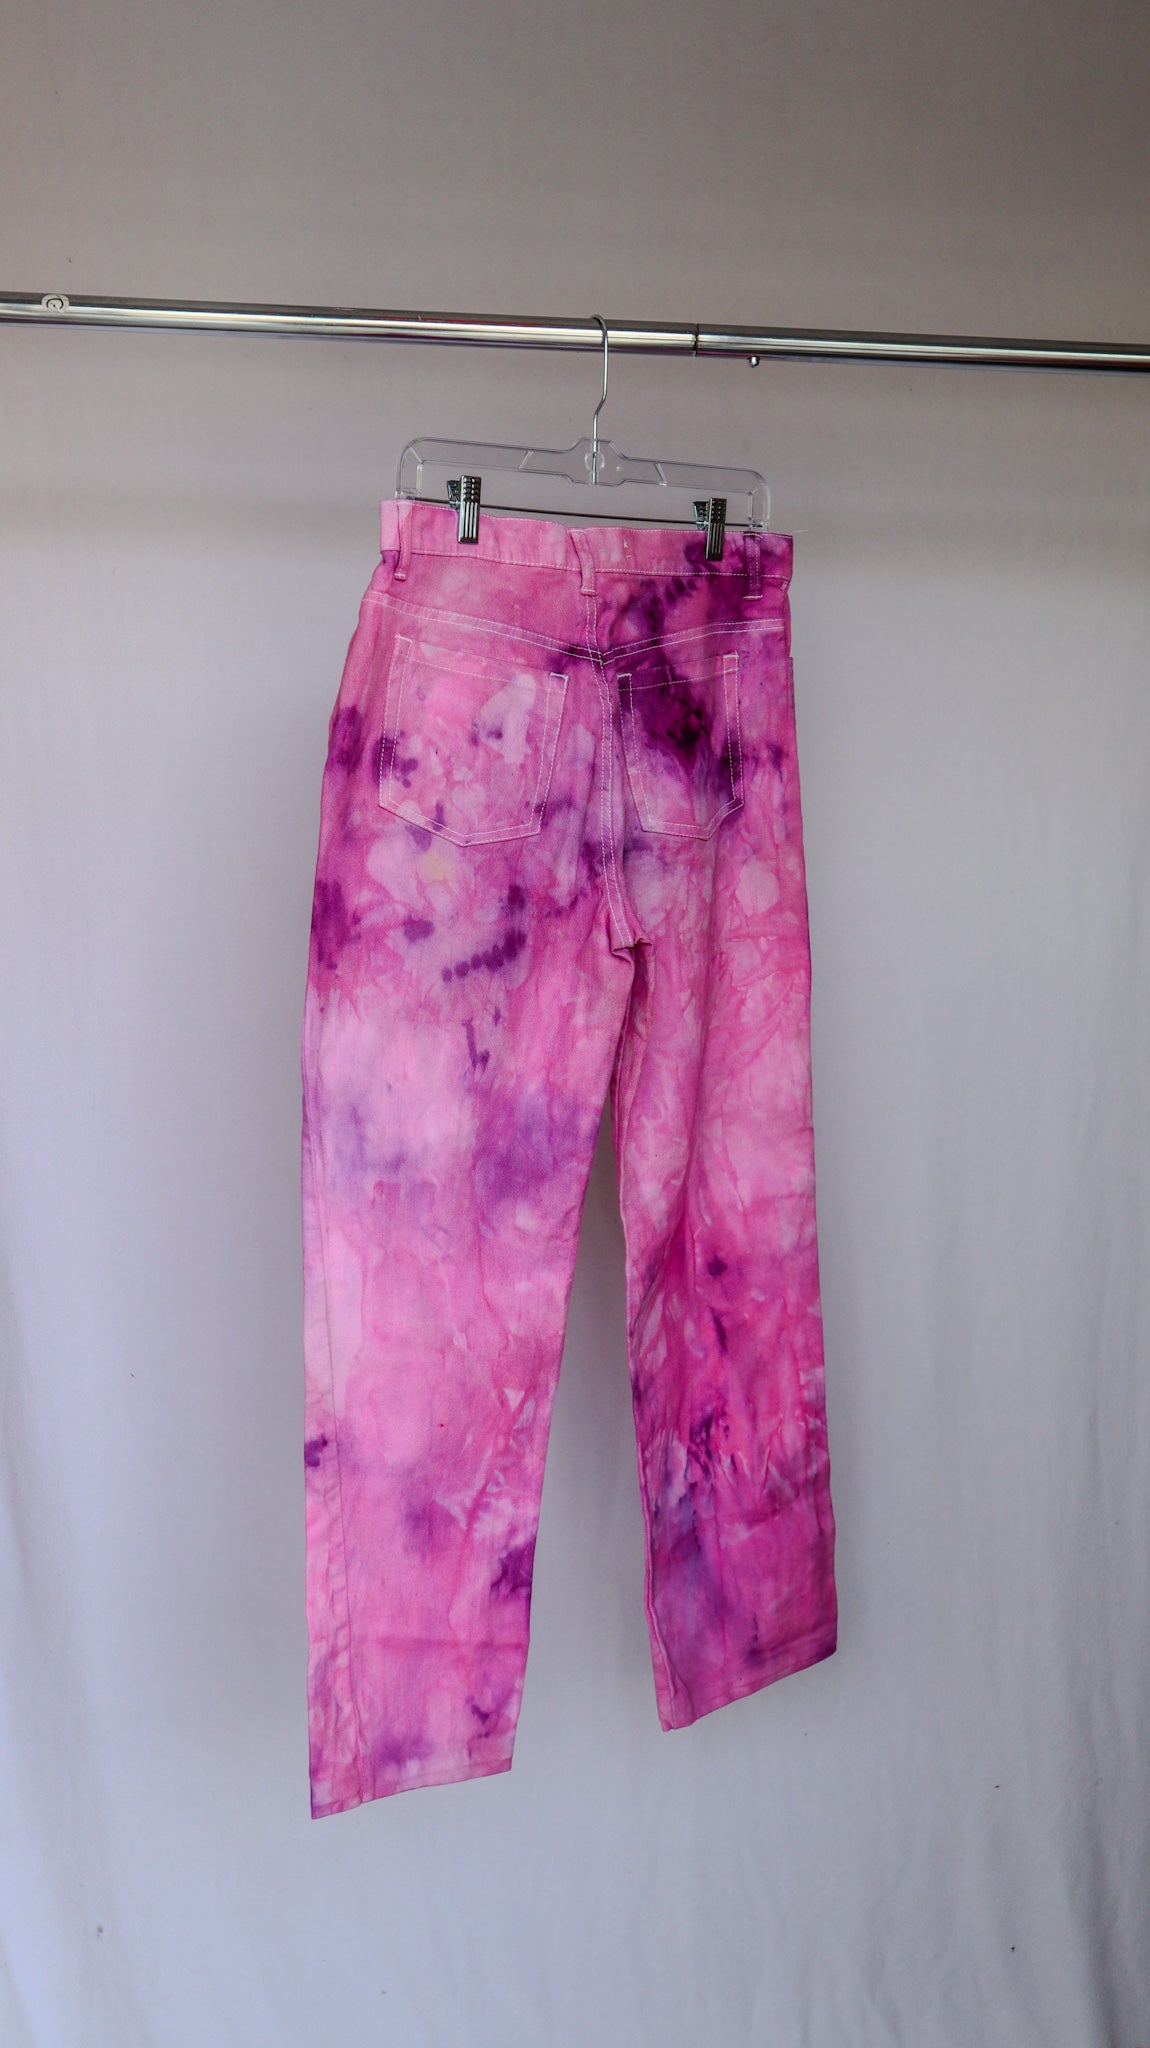 1 OF 1 CUSTOM DYED PINK JEANS